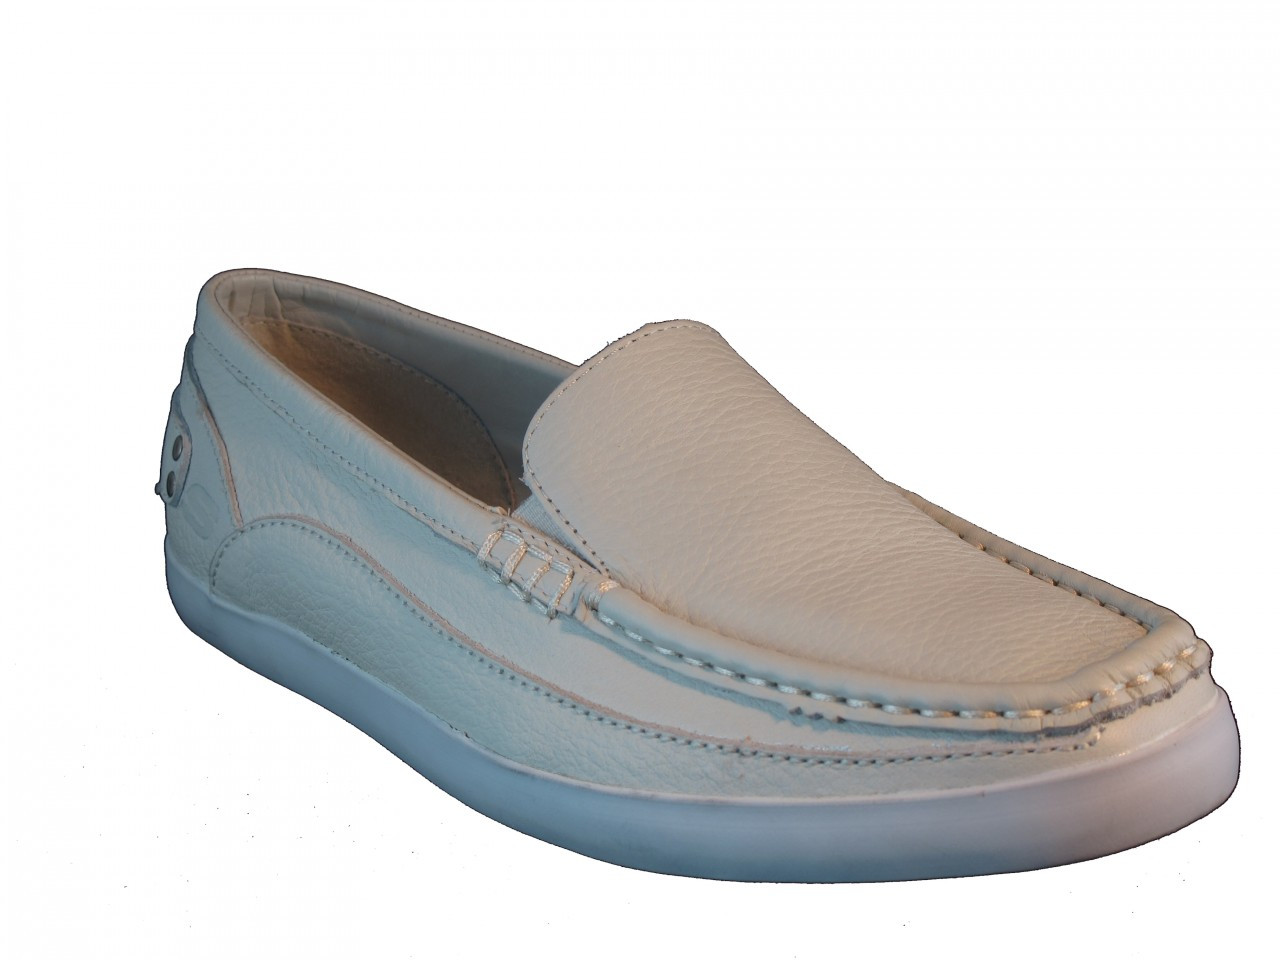 Men's Leather Slip-on casual shoes White by Skechers 62120